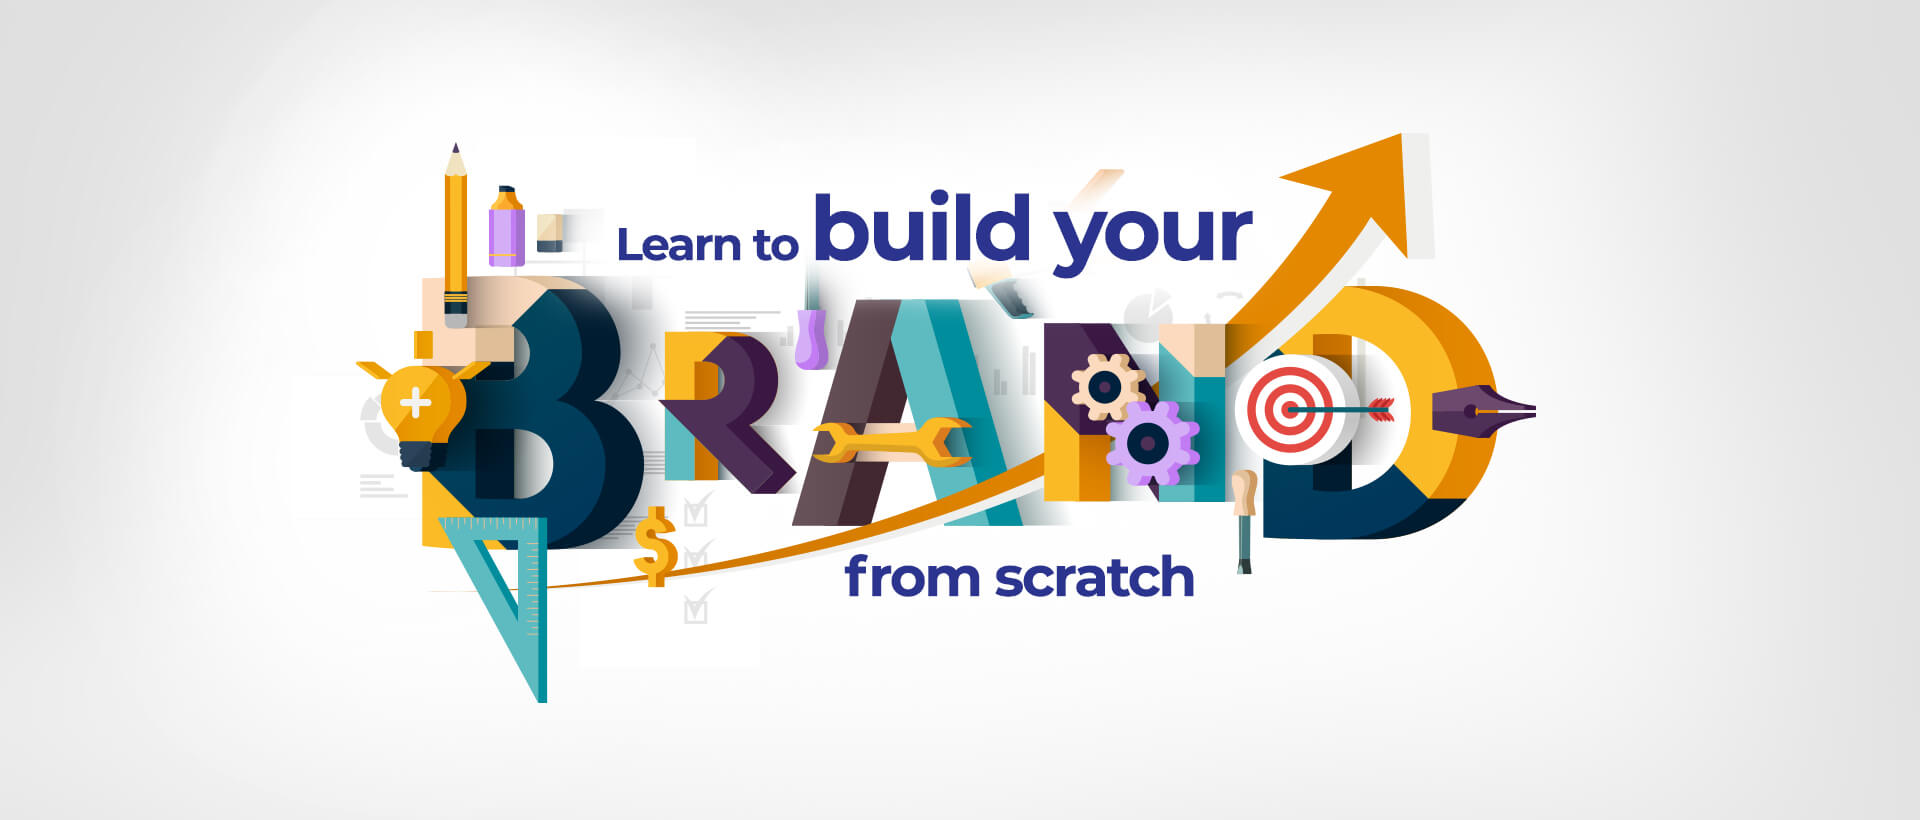 Learn to build your brand from scratch